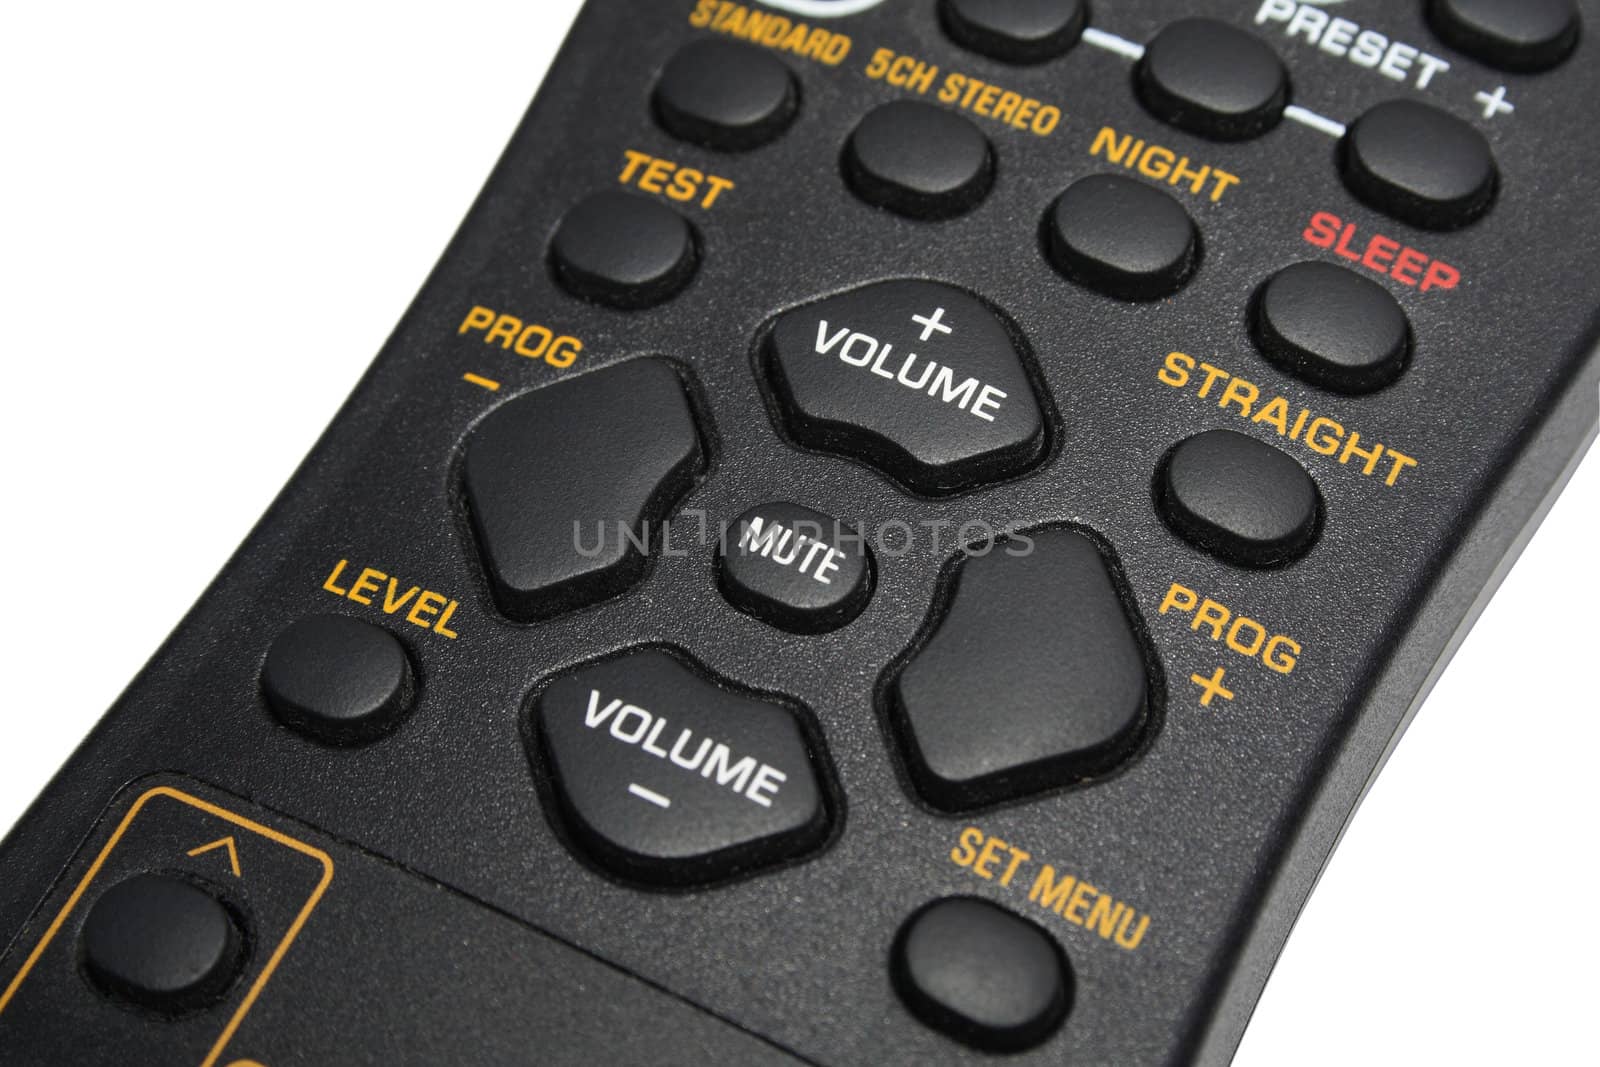 Remote control by Rbox